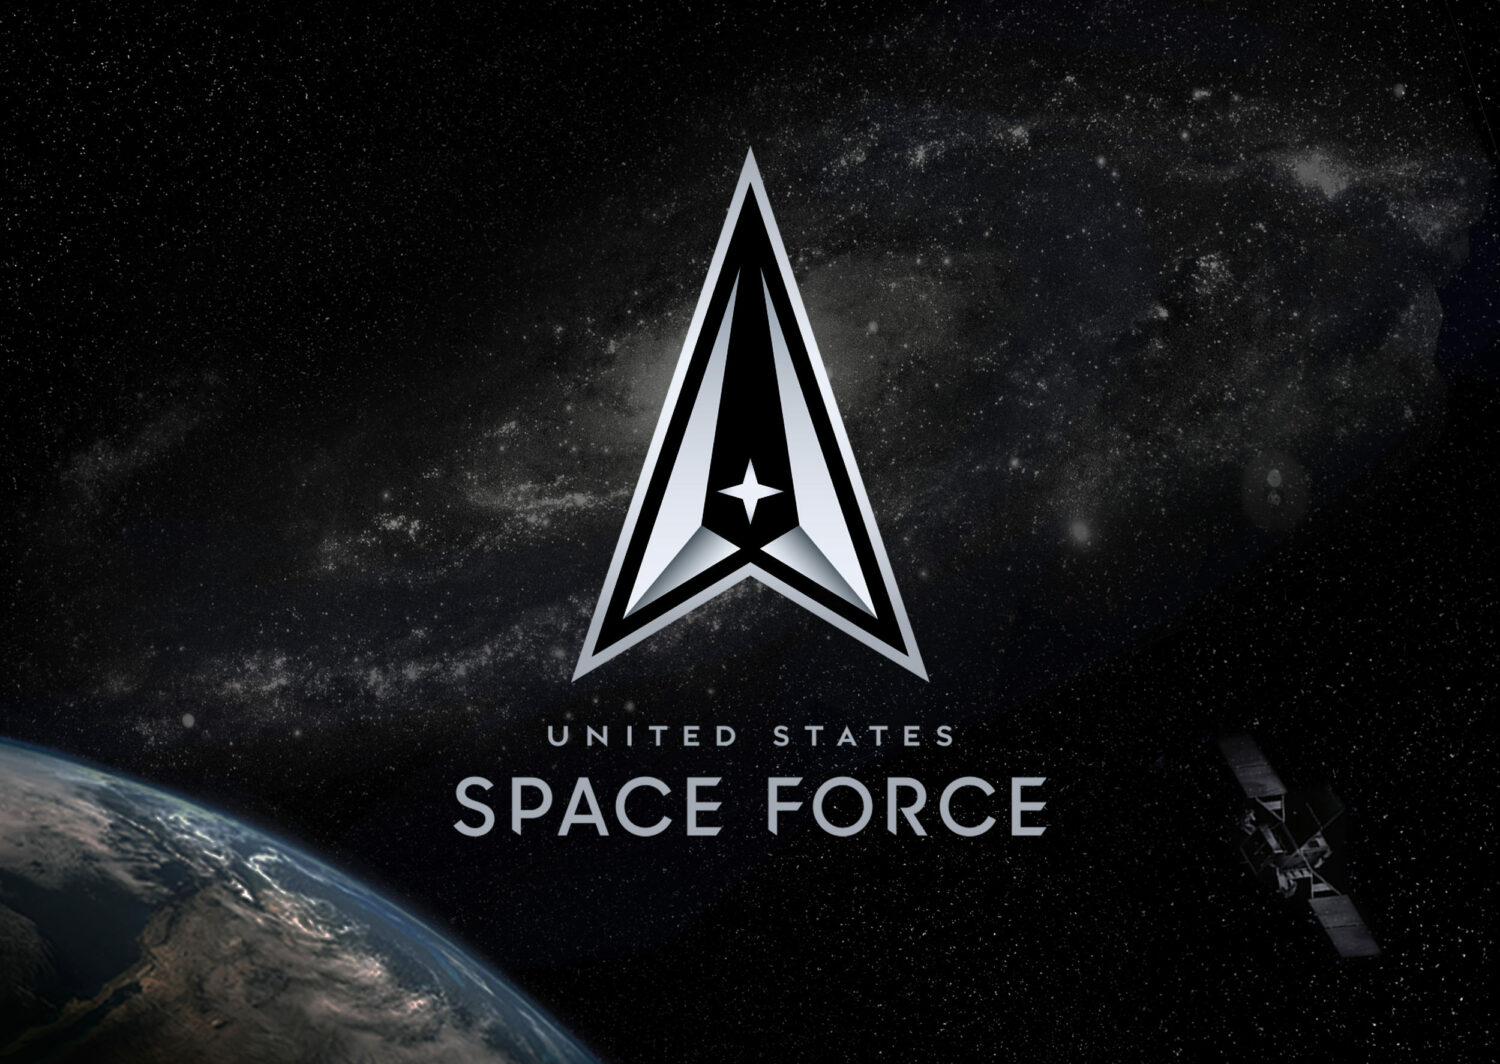 Space Force – Visual, Quelle: United States Space Force